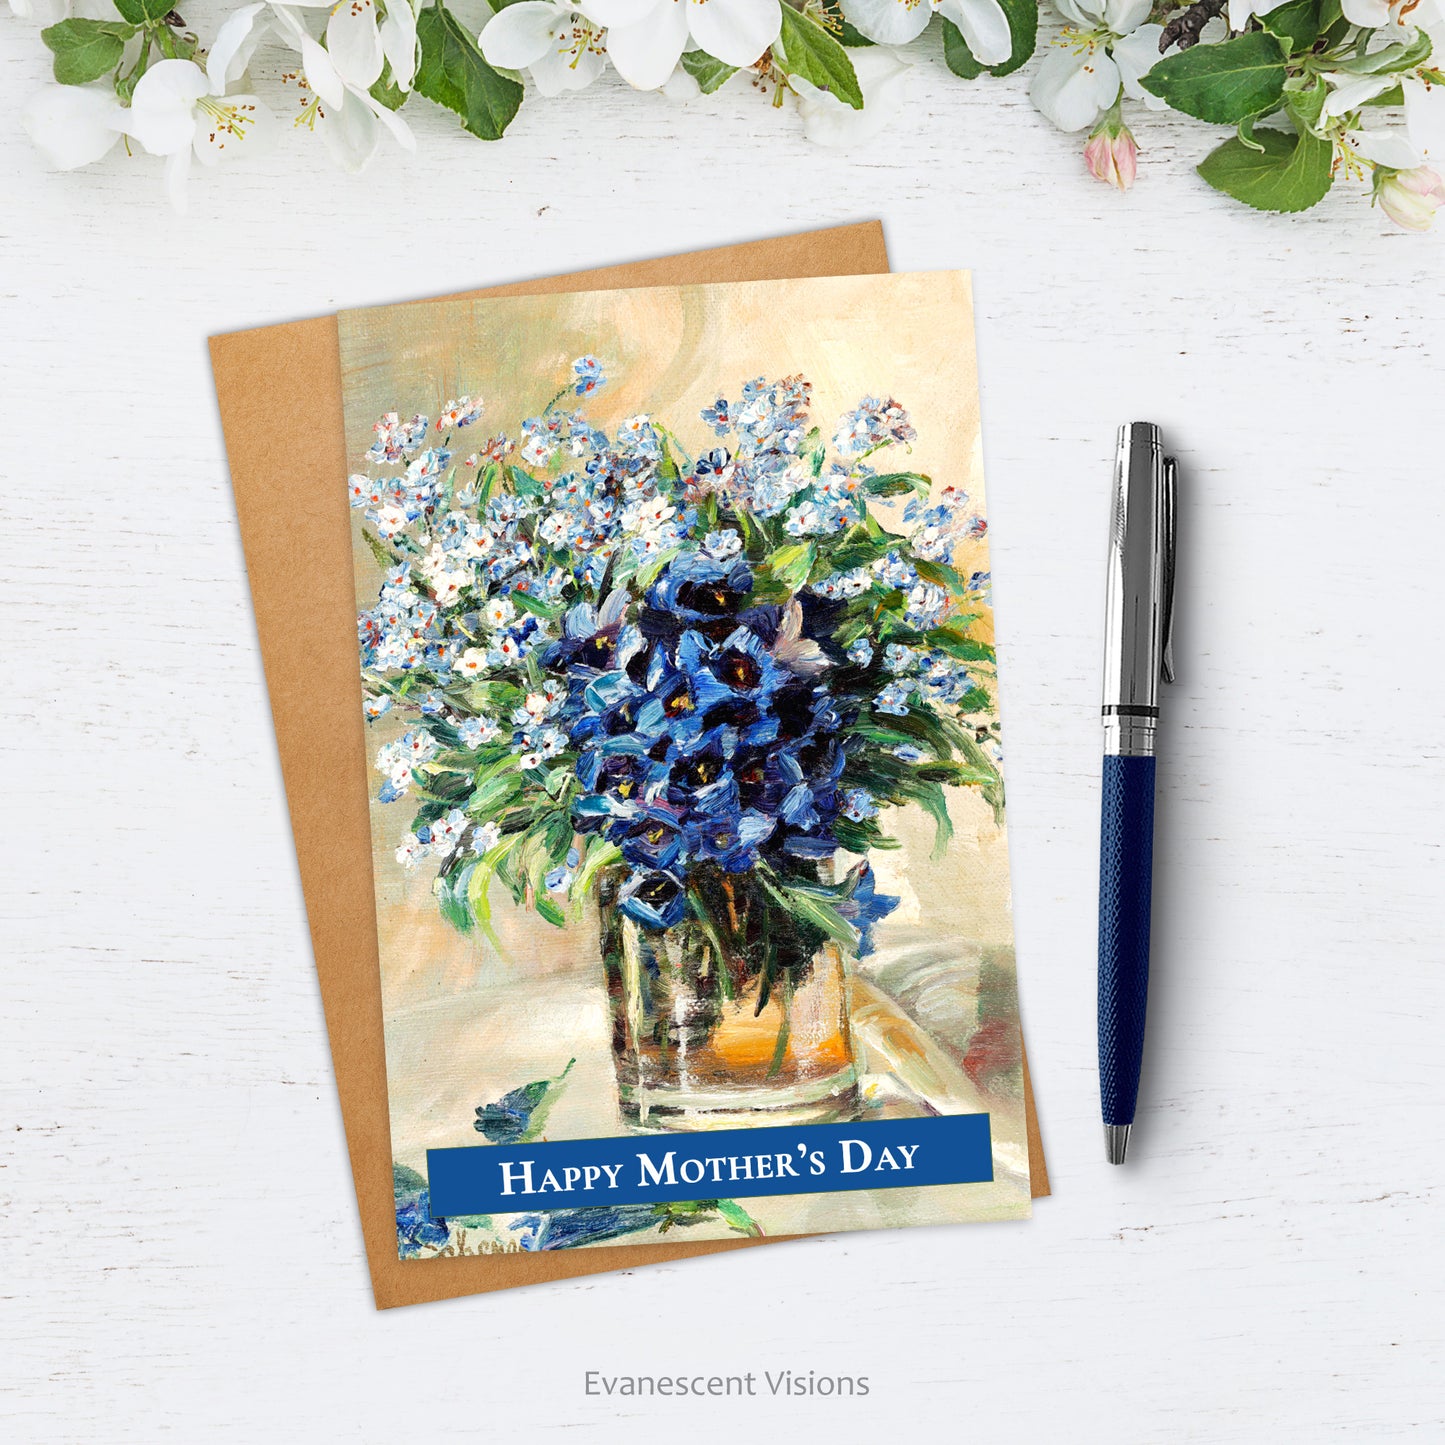 Card and envelope on white surface. Card has painting, 'Spring Flowers in a Glass Vase' by Rosa Scherer  and 'Happy Mother's Day' on front. By the side of the card rests a pen and above white blossom.